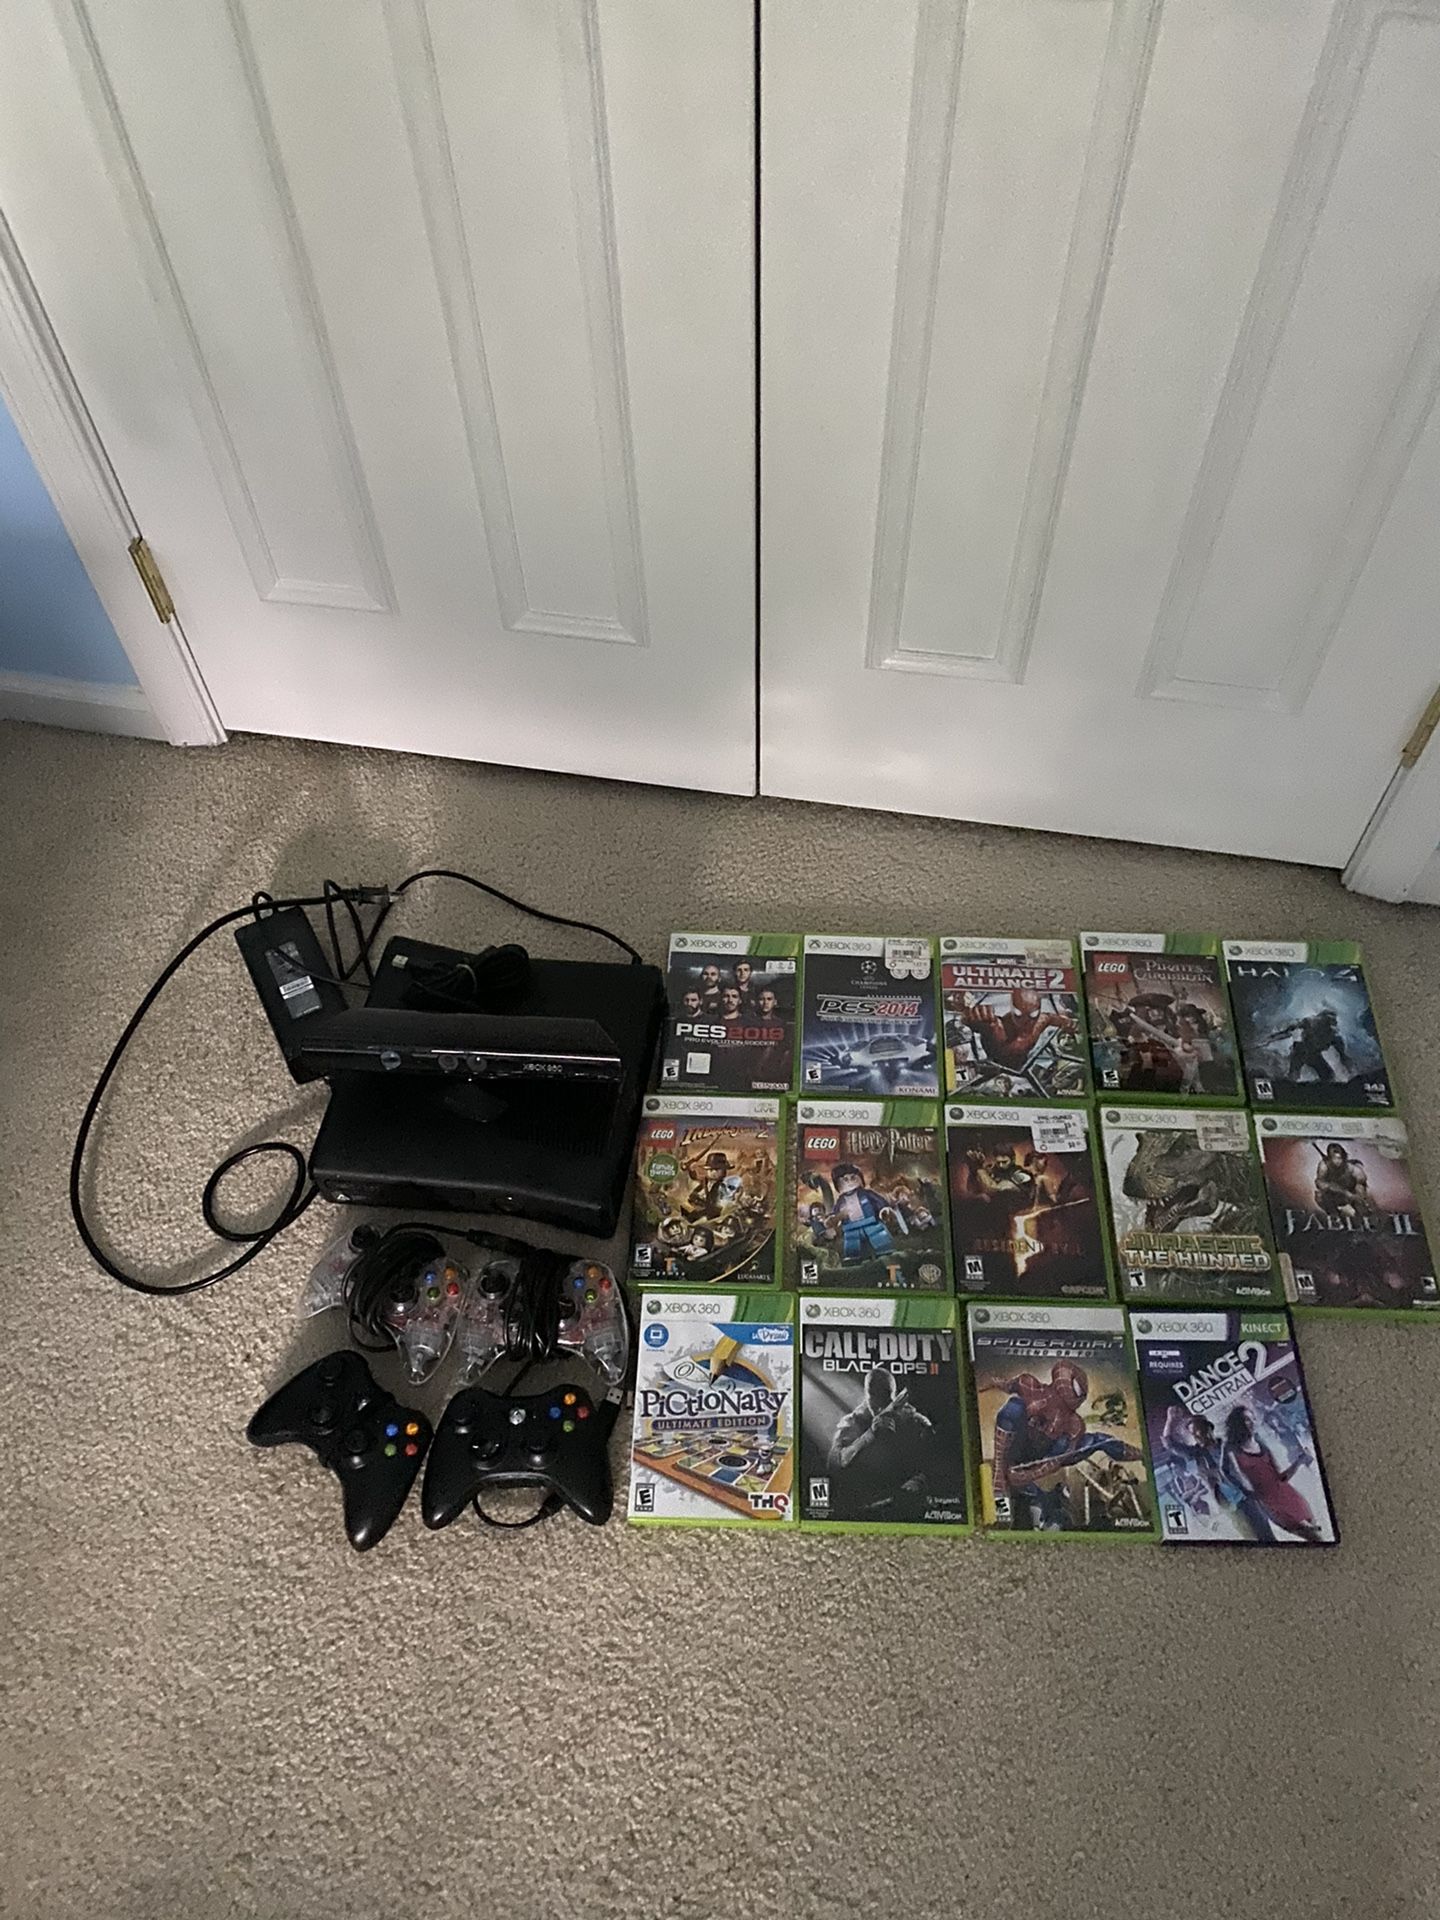 Xbox 360 + Kinect + Controllers + Games